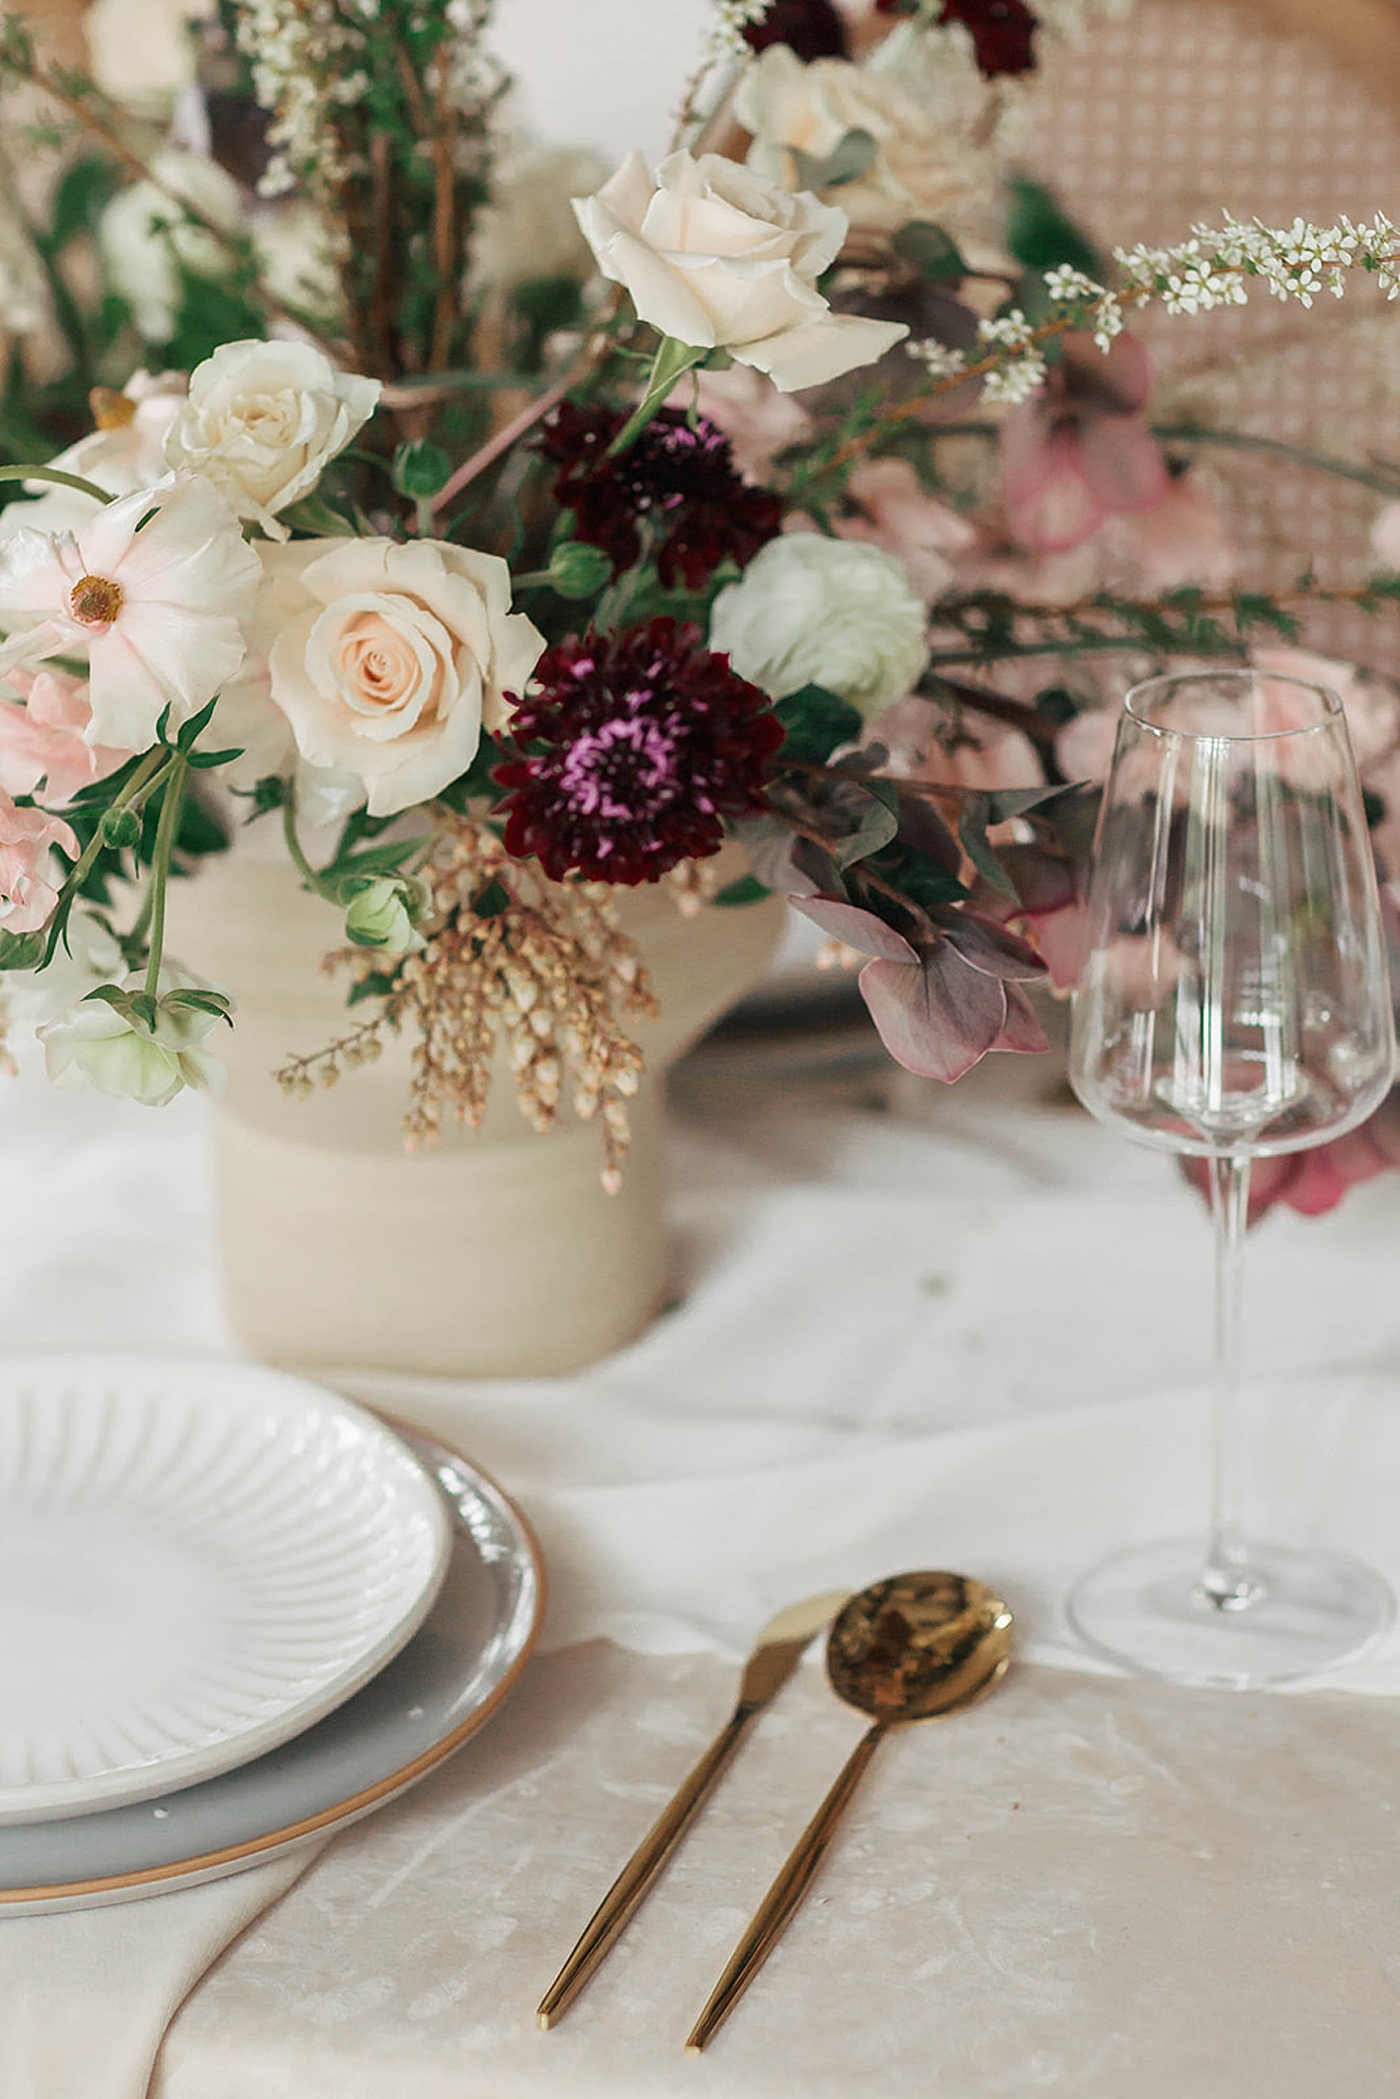 Details of wedding table with pink and blush flowers and flatware | Romantic French Countryside Editorial by Carters Event Co